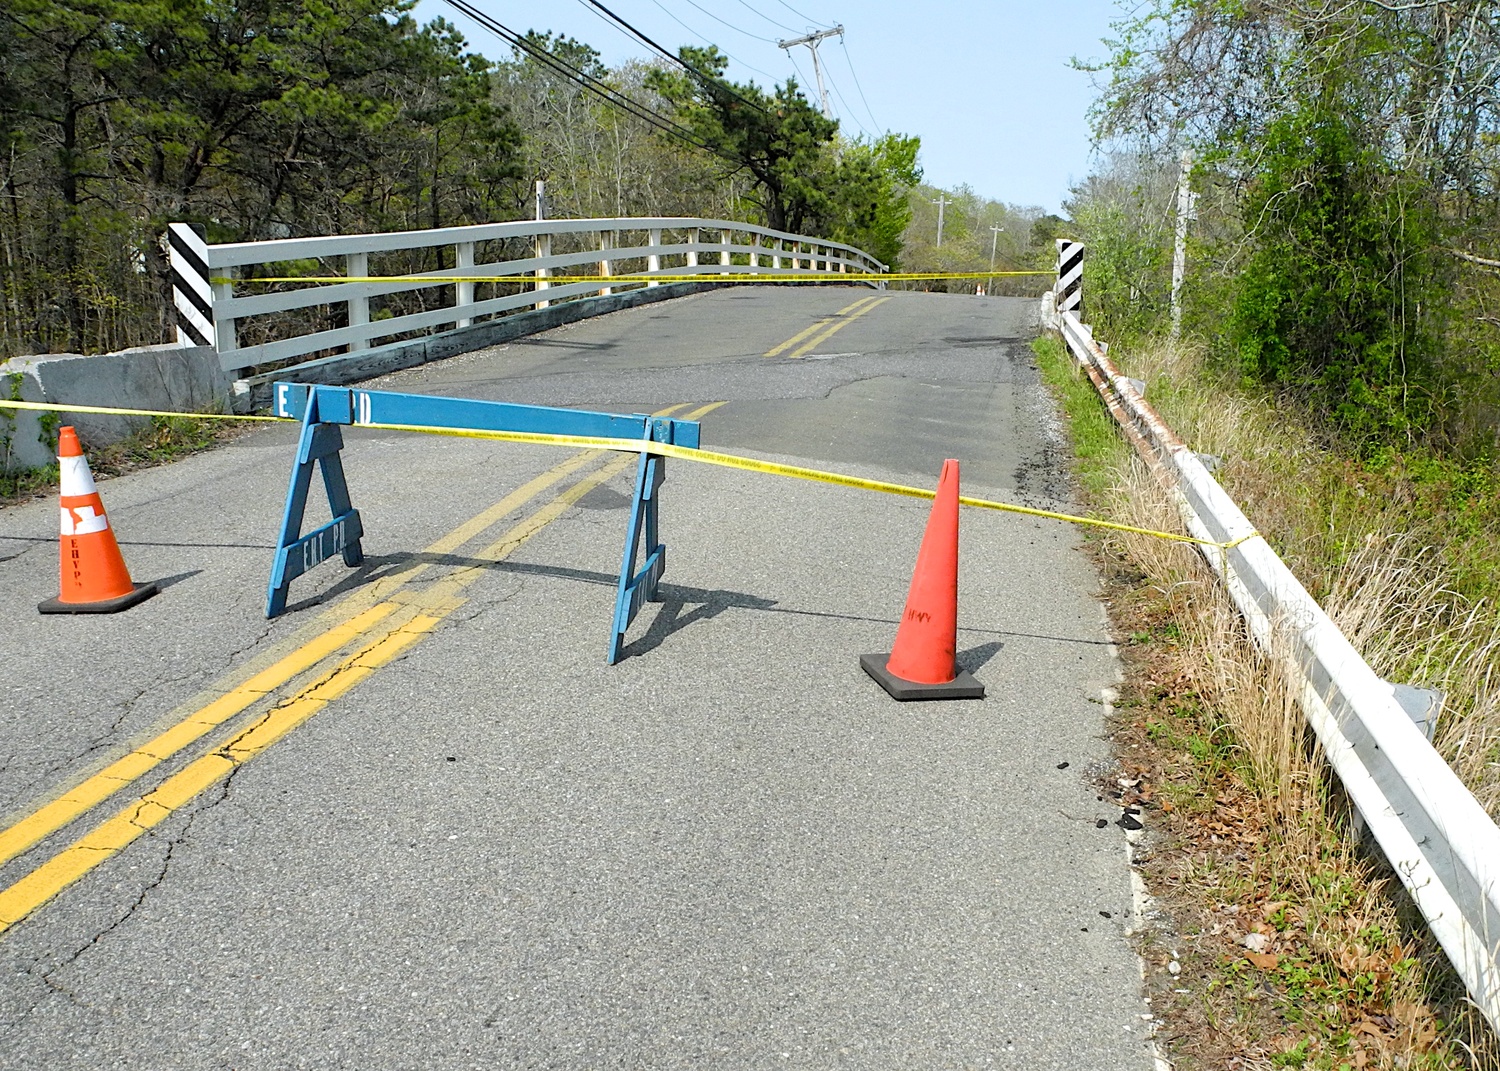 The Cranberry Hole Road bridge spanning the LIRR tracks in Amagansett is beyond repair, state engineers have determined, and will have to be replaced. But how long that will take, and who will pay for it, remains to be seen. 
KYRIL BROMLEY